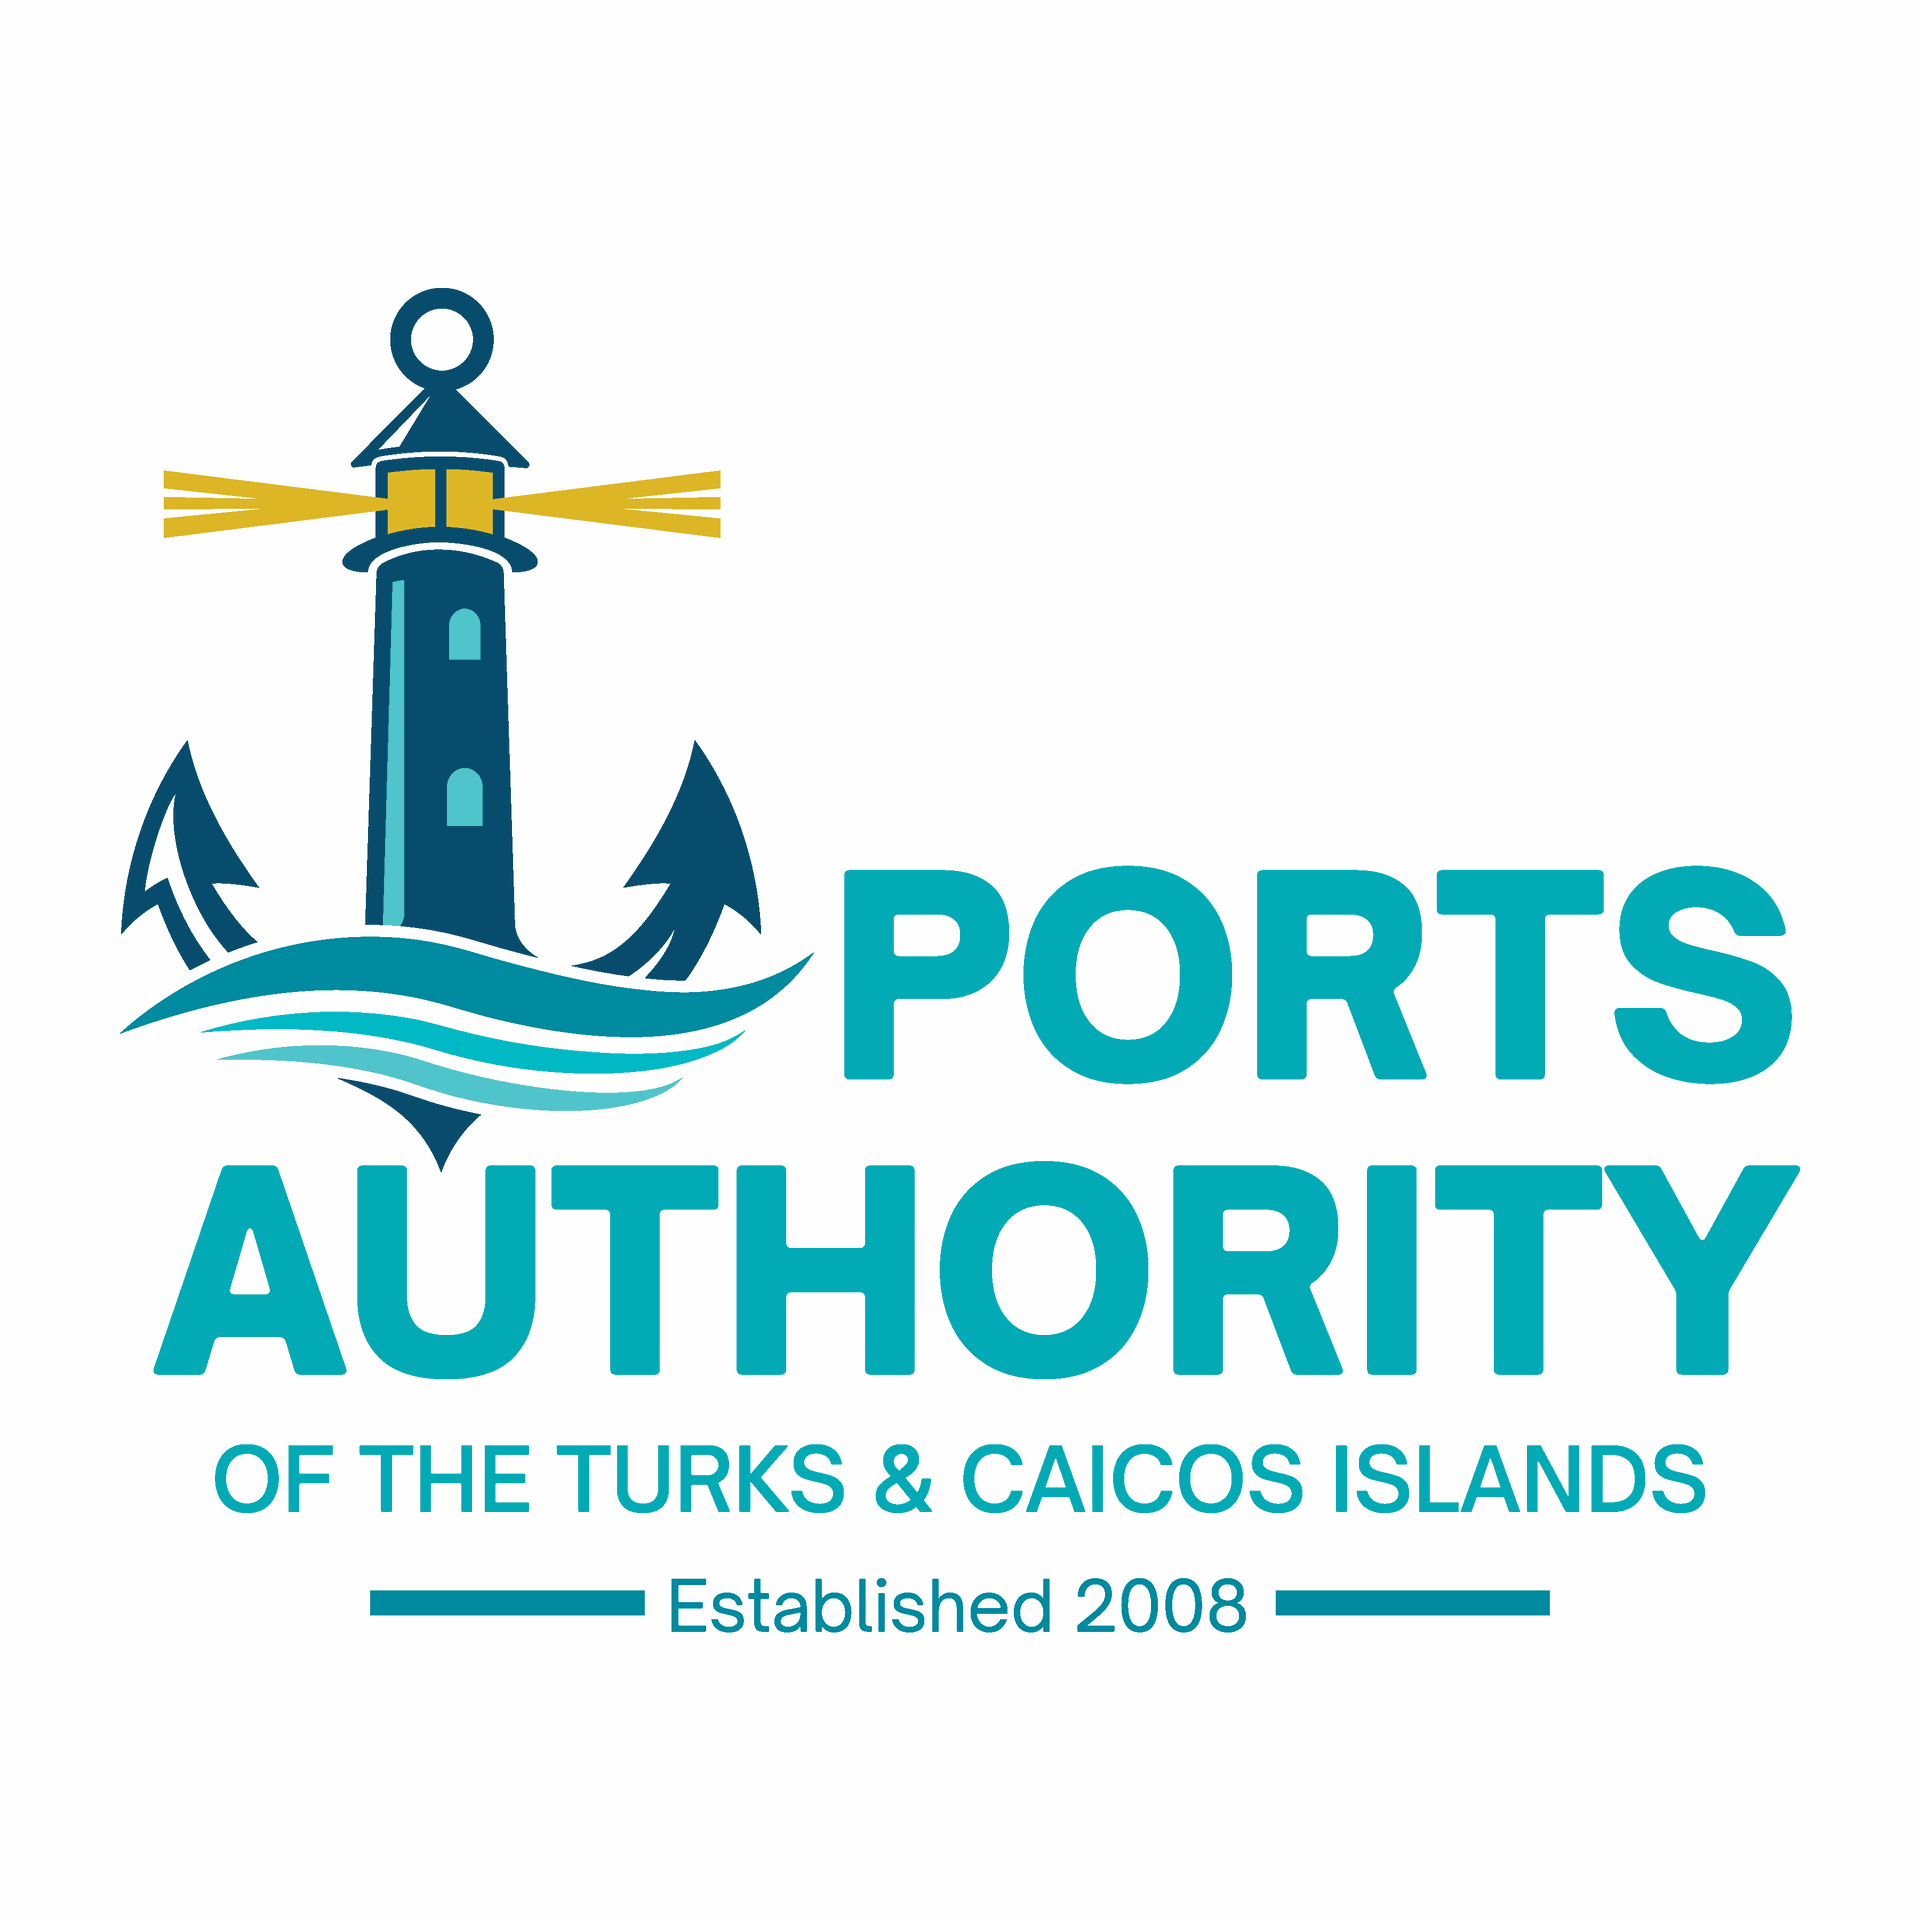 PORTS AUTHORITY OF THE TURKS & CAICOS ISLANDS